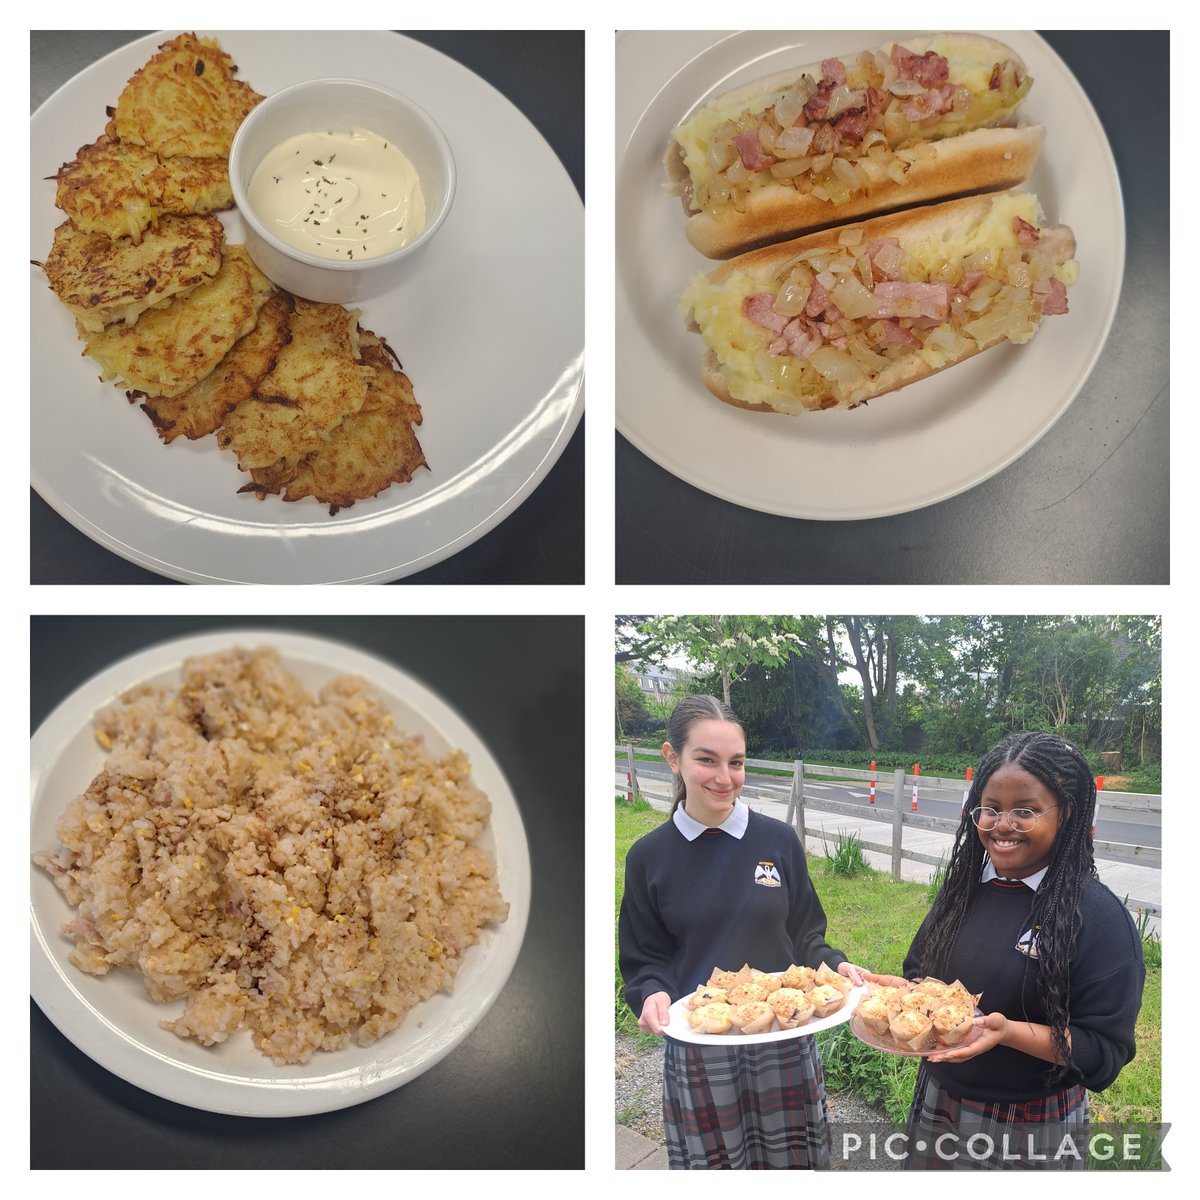 Multicultural dishes made in Home Ec TY class this morning. Katrina made Draniki , Potato Pancakes . Giovanni made Dogao, Brazilian Hot Dogs. Yucheng and Daniel made Bacon and Egg fried Rice .  Thanks also to Emilia and Alicia who made Blueberry Muffins for Parents Coffee Morning